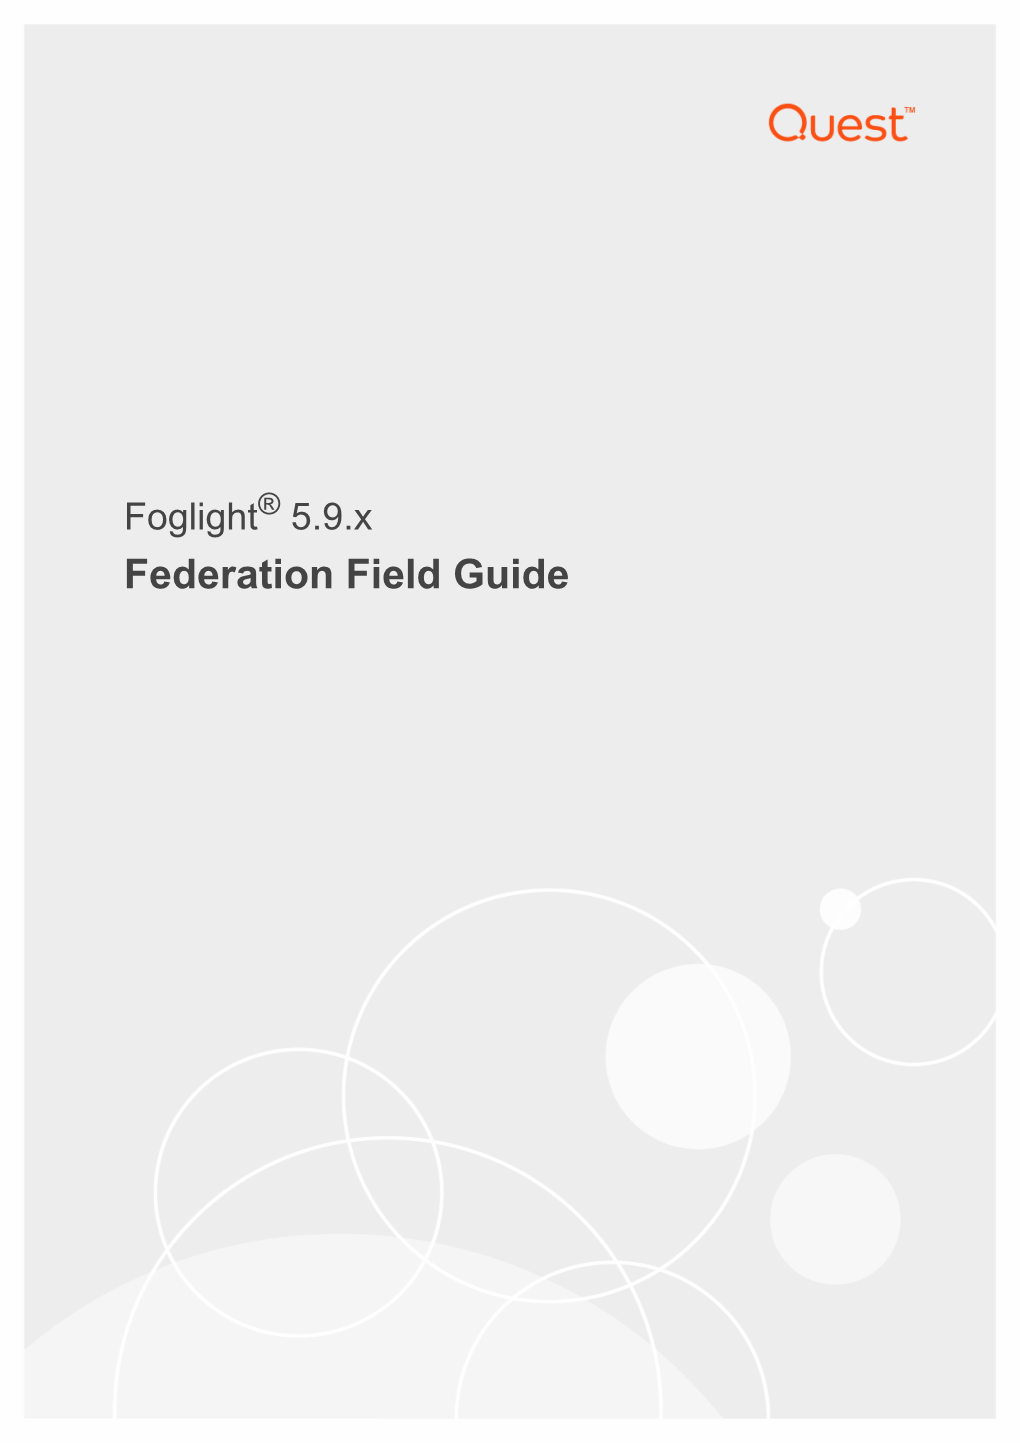 Foglight Federation Field Guide Updated - June 2018 Software Version - 5.9.X Contents